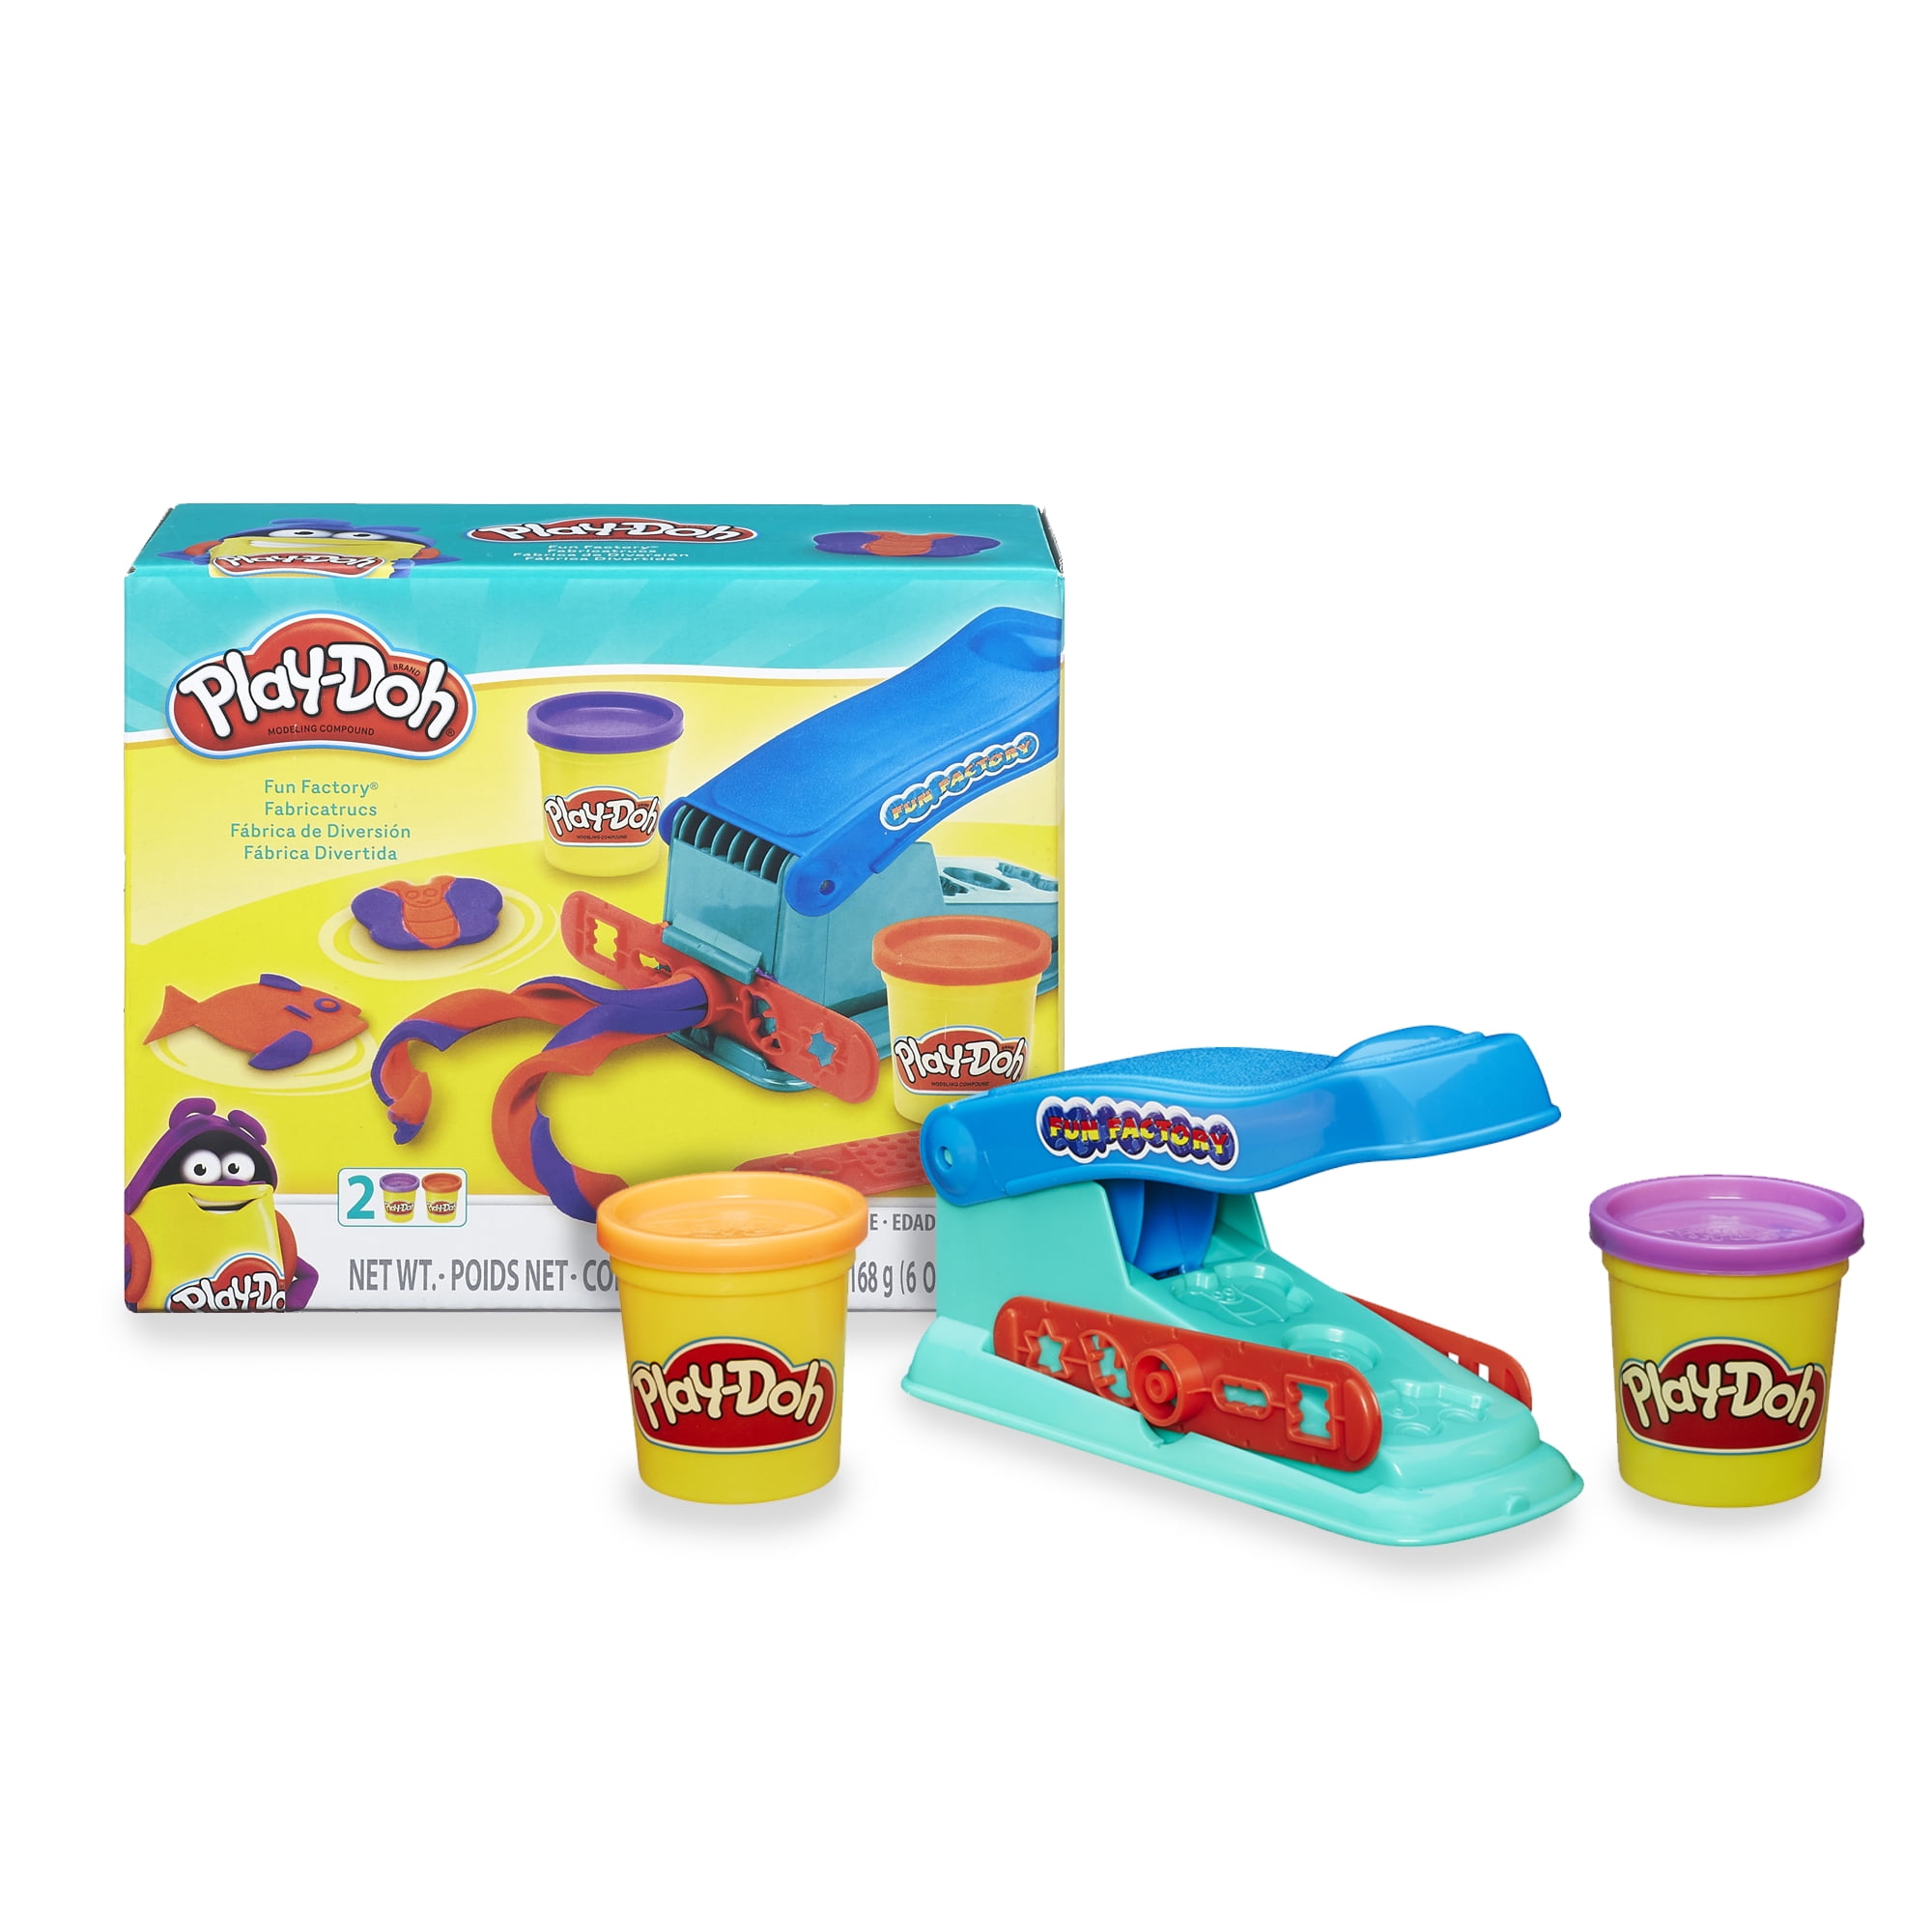 Play Doh Sparkle Collection 6 Colors Compounds 2 Cutters Included by Hasbro Fun 